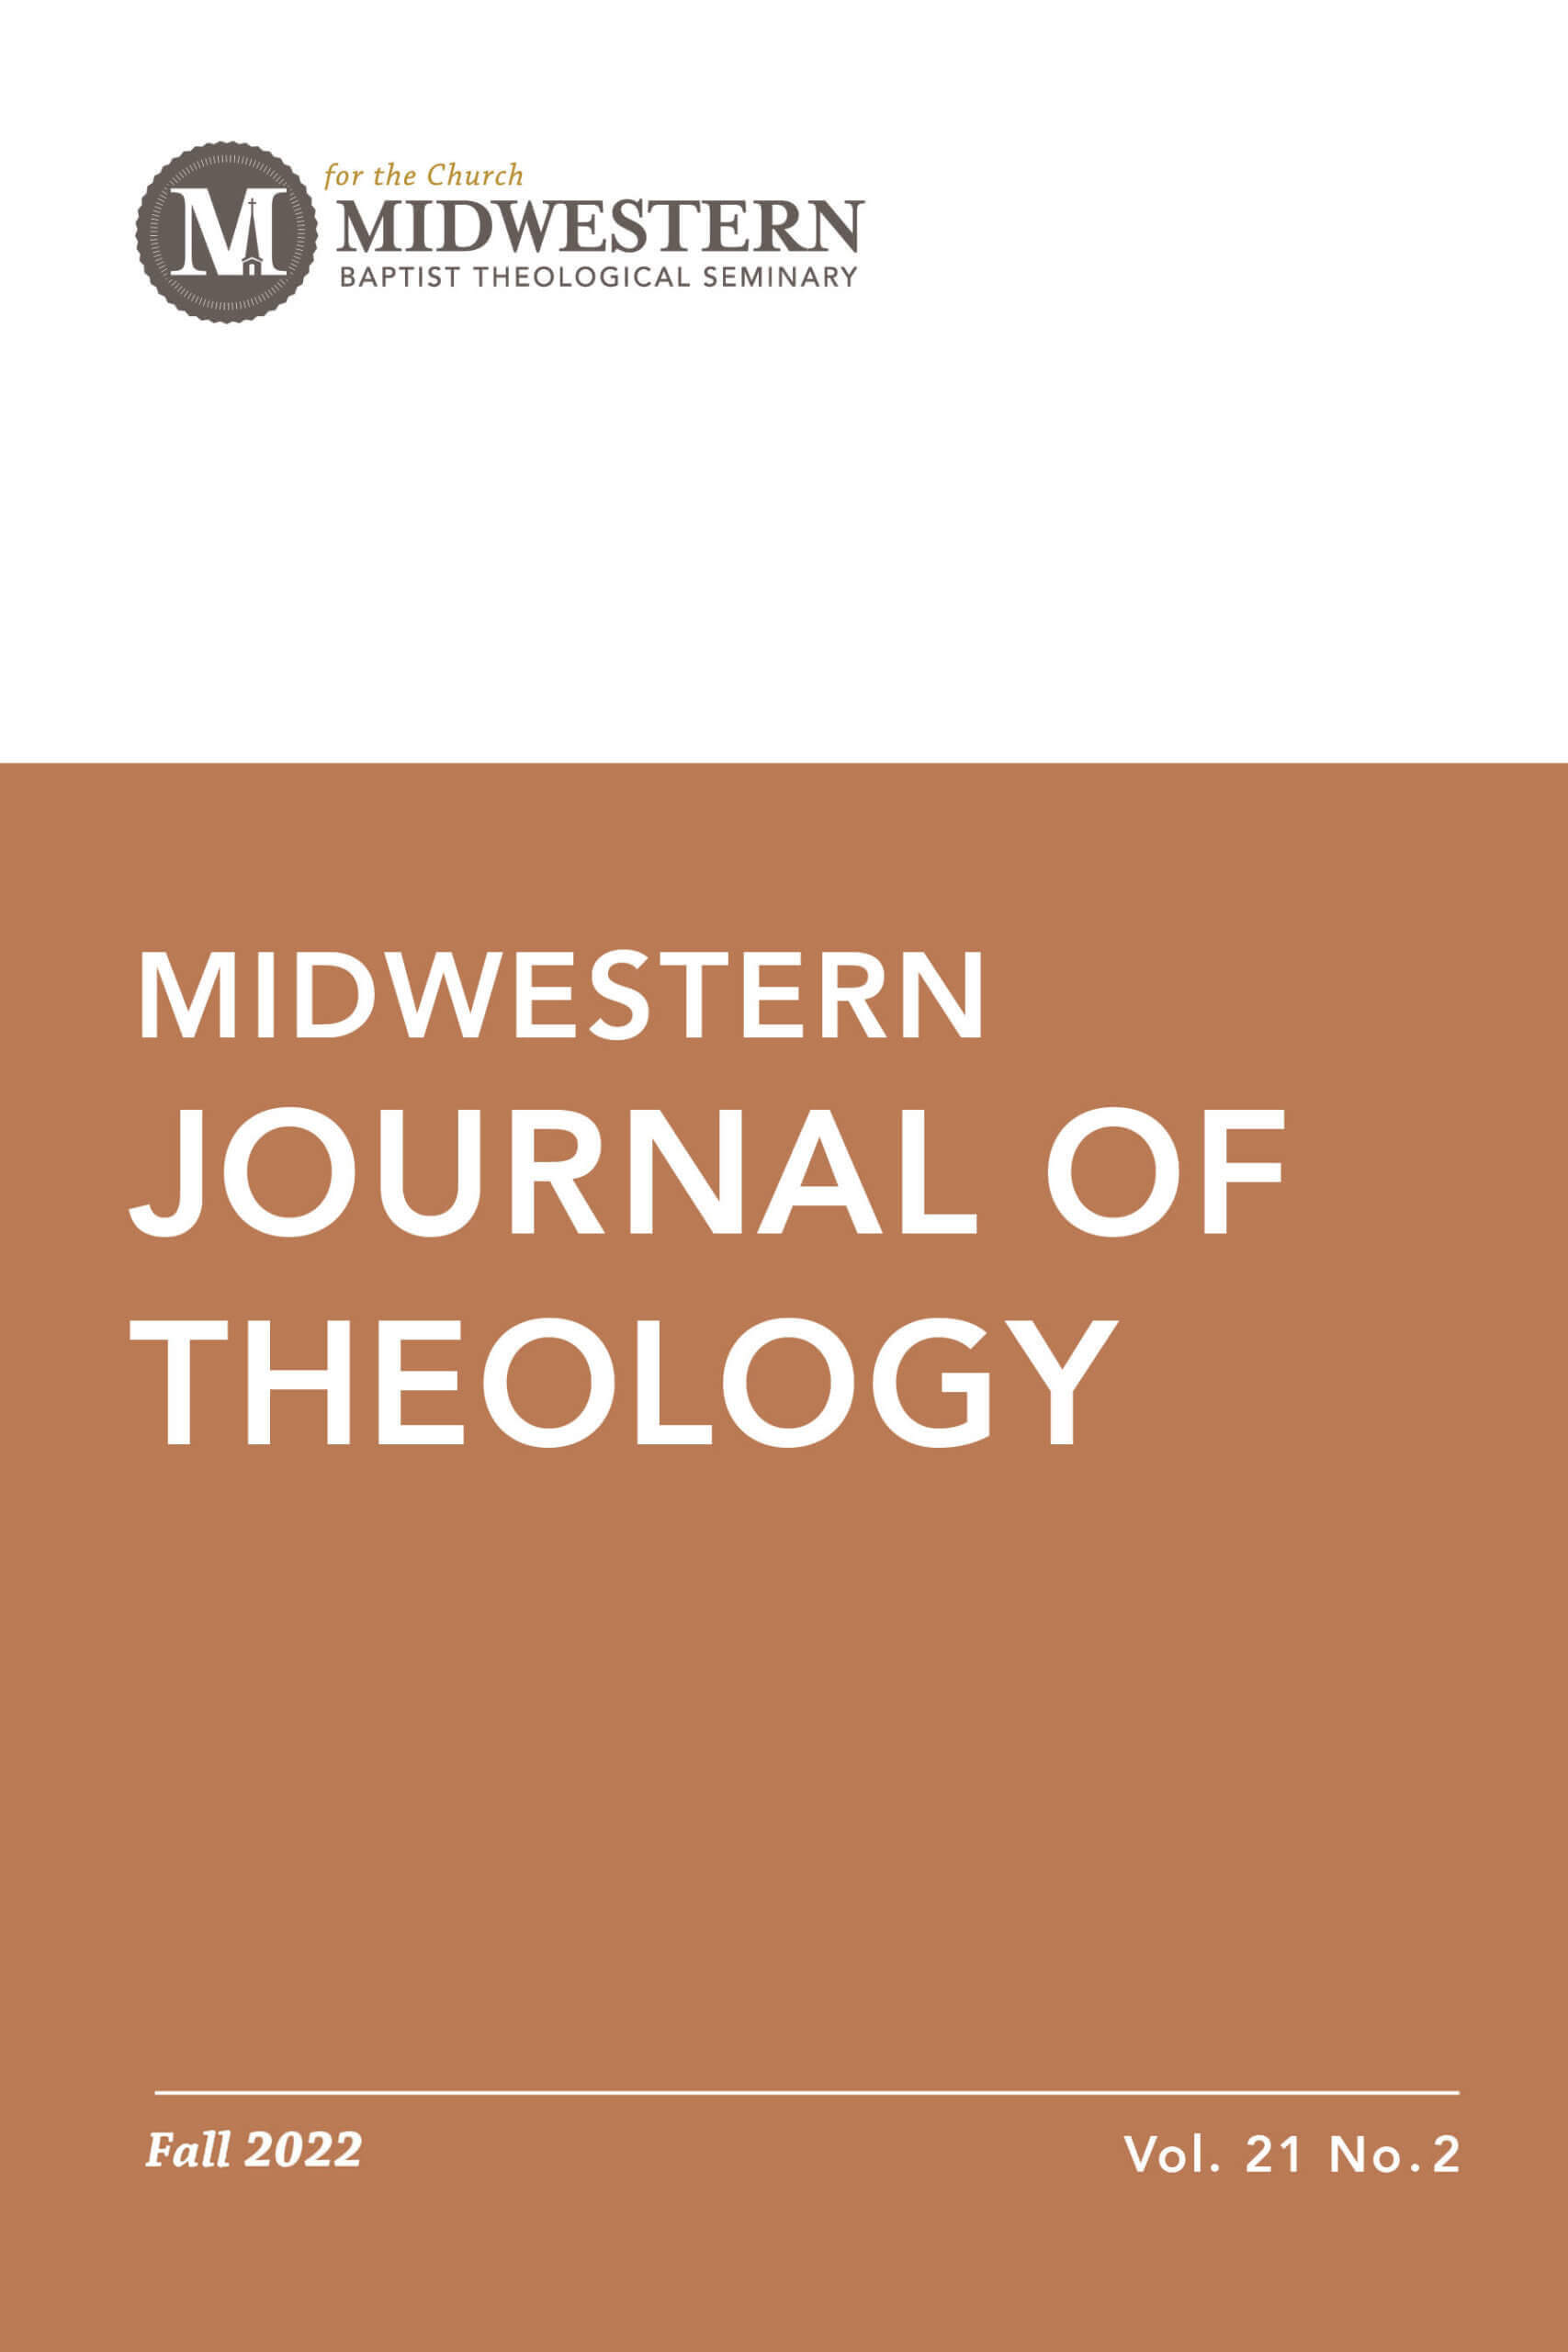 Fall 2022 Midwestern Journal of Theology